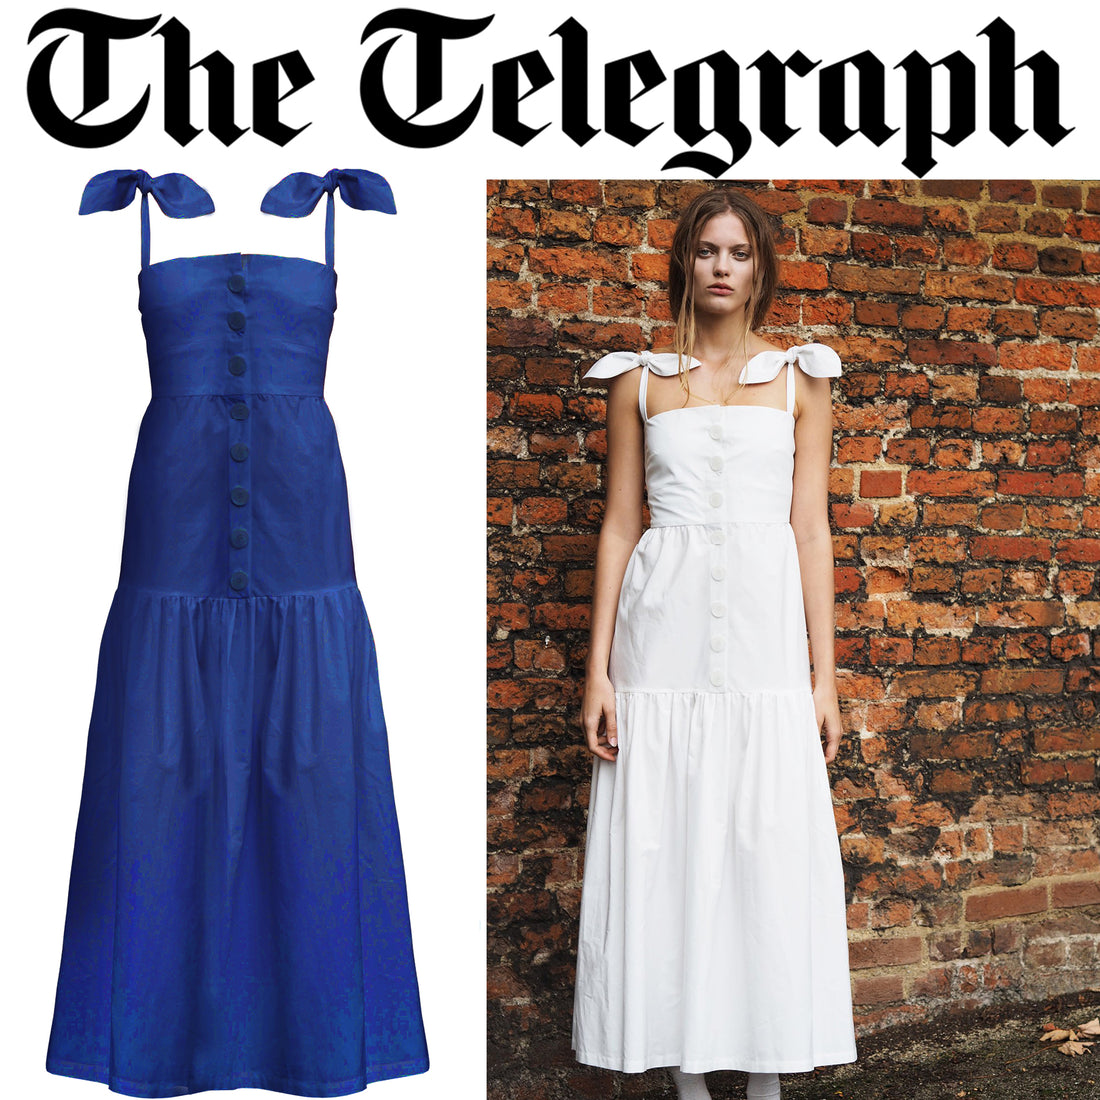 SS18 Primrose Dress Featured by The Telegraph